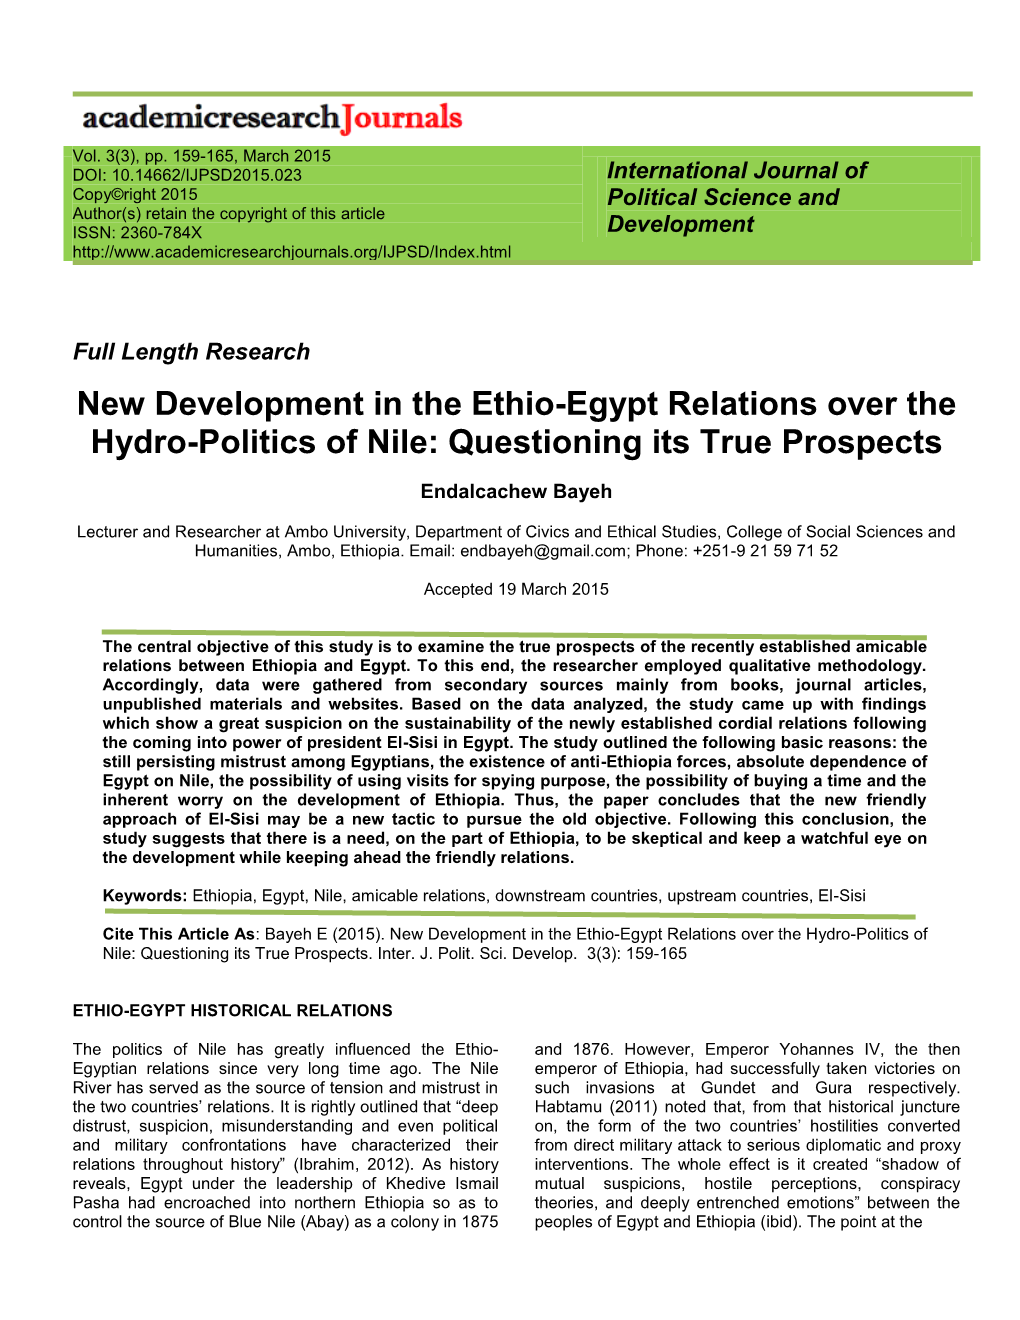 New Development in the Ethio-Egypt Relations Over the Hydro-Politics of Nile: Questioning Its True Prospects